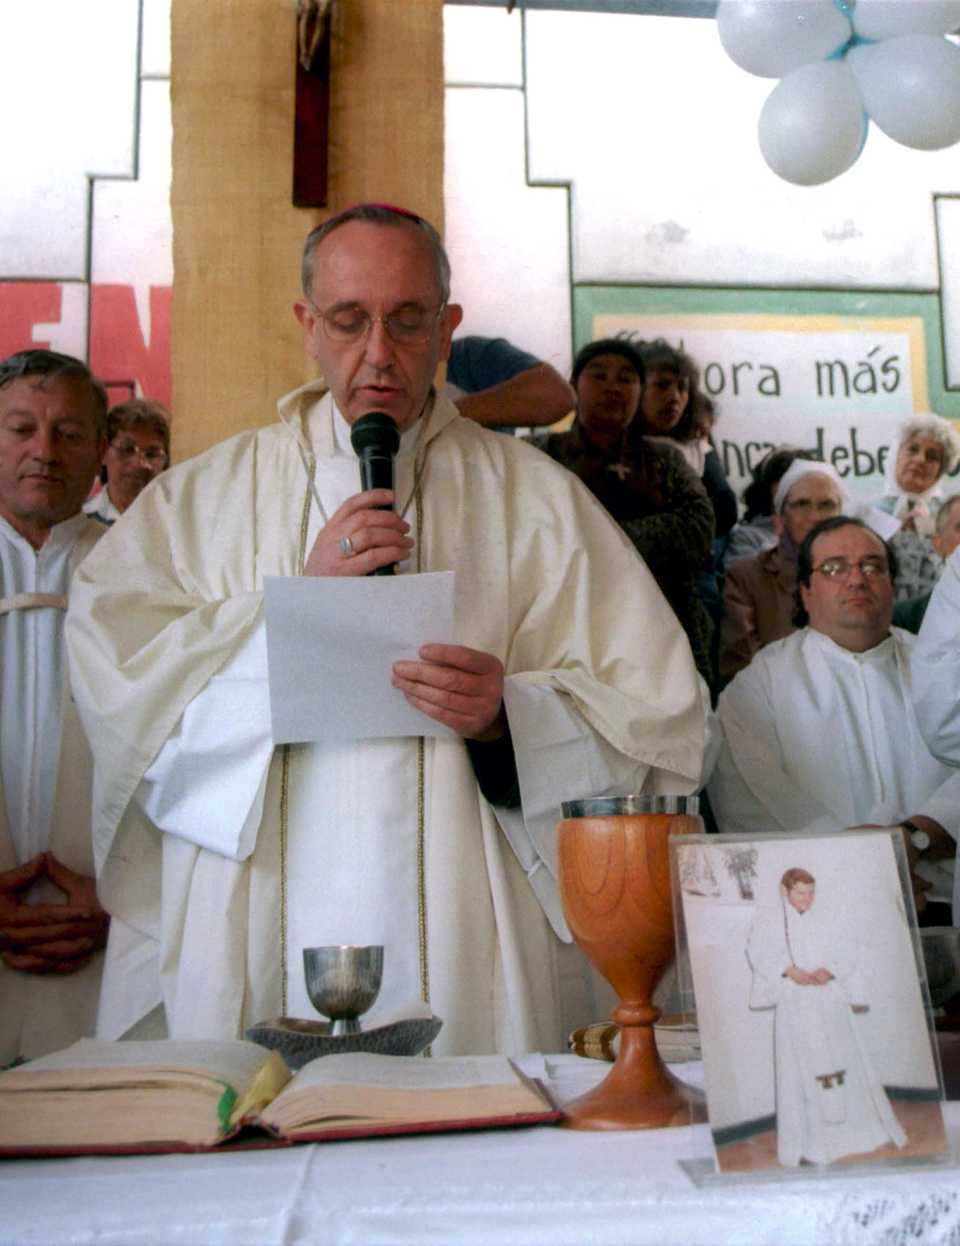 In this 2000 photo, Argentina's Archbishop Jorge Mario Bergoglio (Pope Francis) speaks during a Mass in honor of slain priest Carlos Mugica, an advocate of Liberation theology, who was assassinated by the Argentine Anti-Communist Alliance, in 1974.